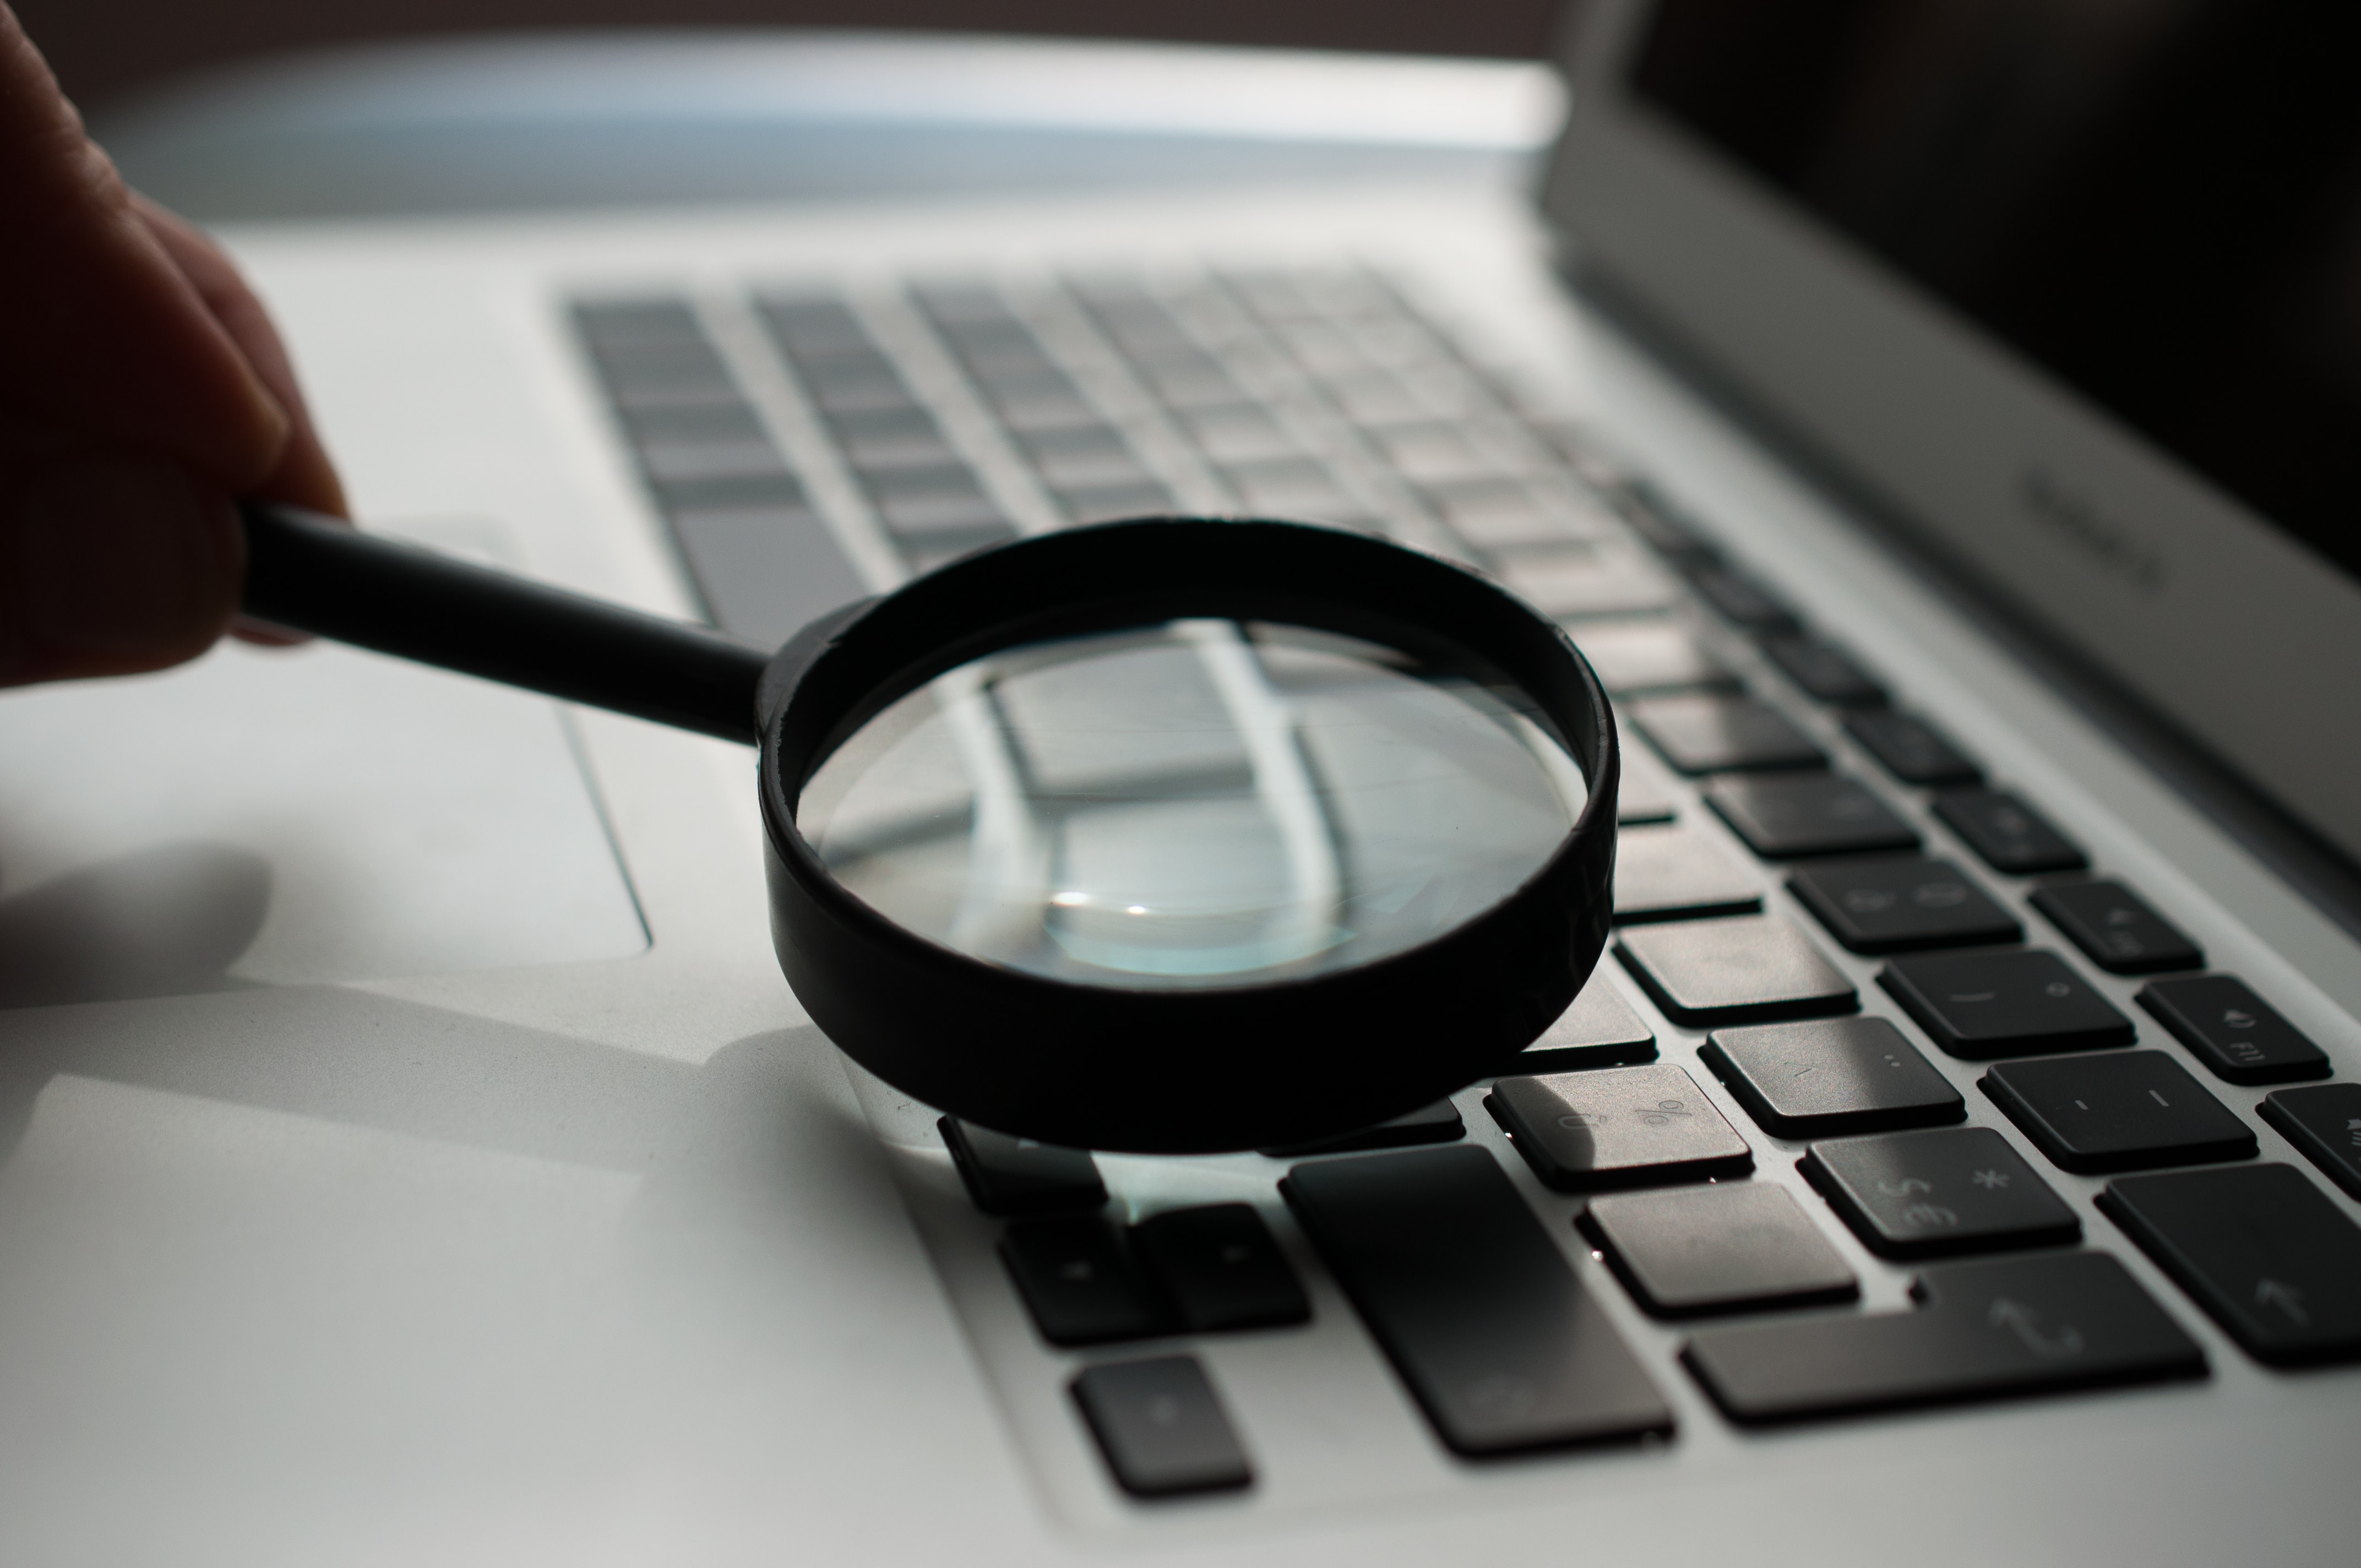 Magnifying glass on laptop keyboard to search for a topic